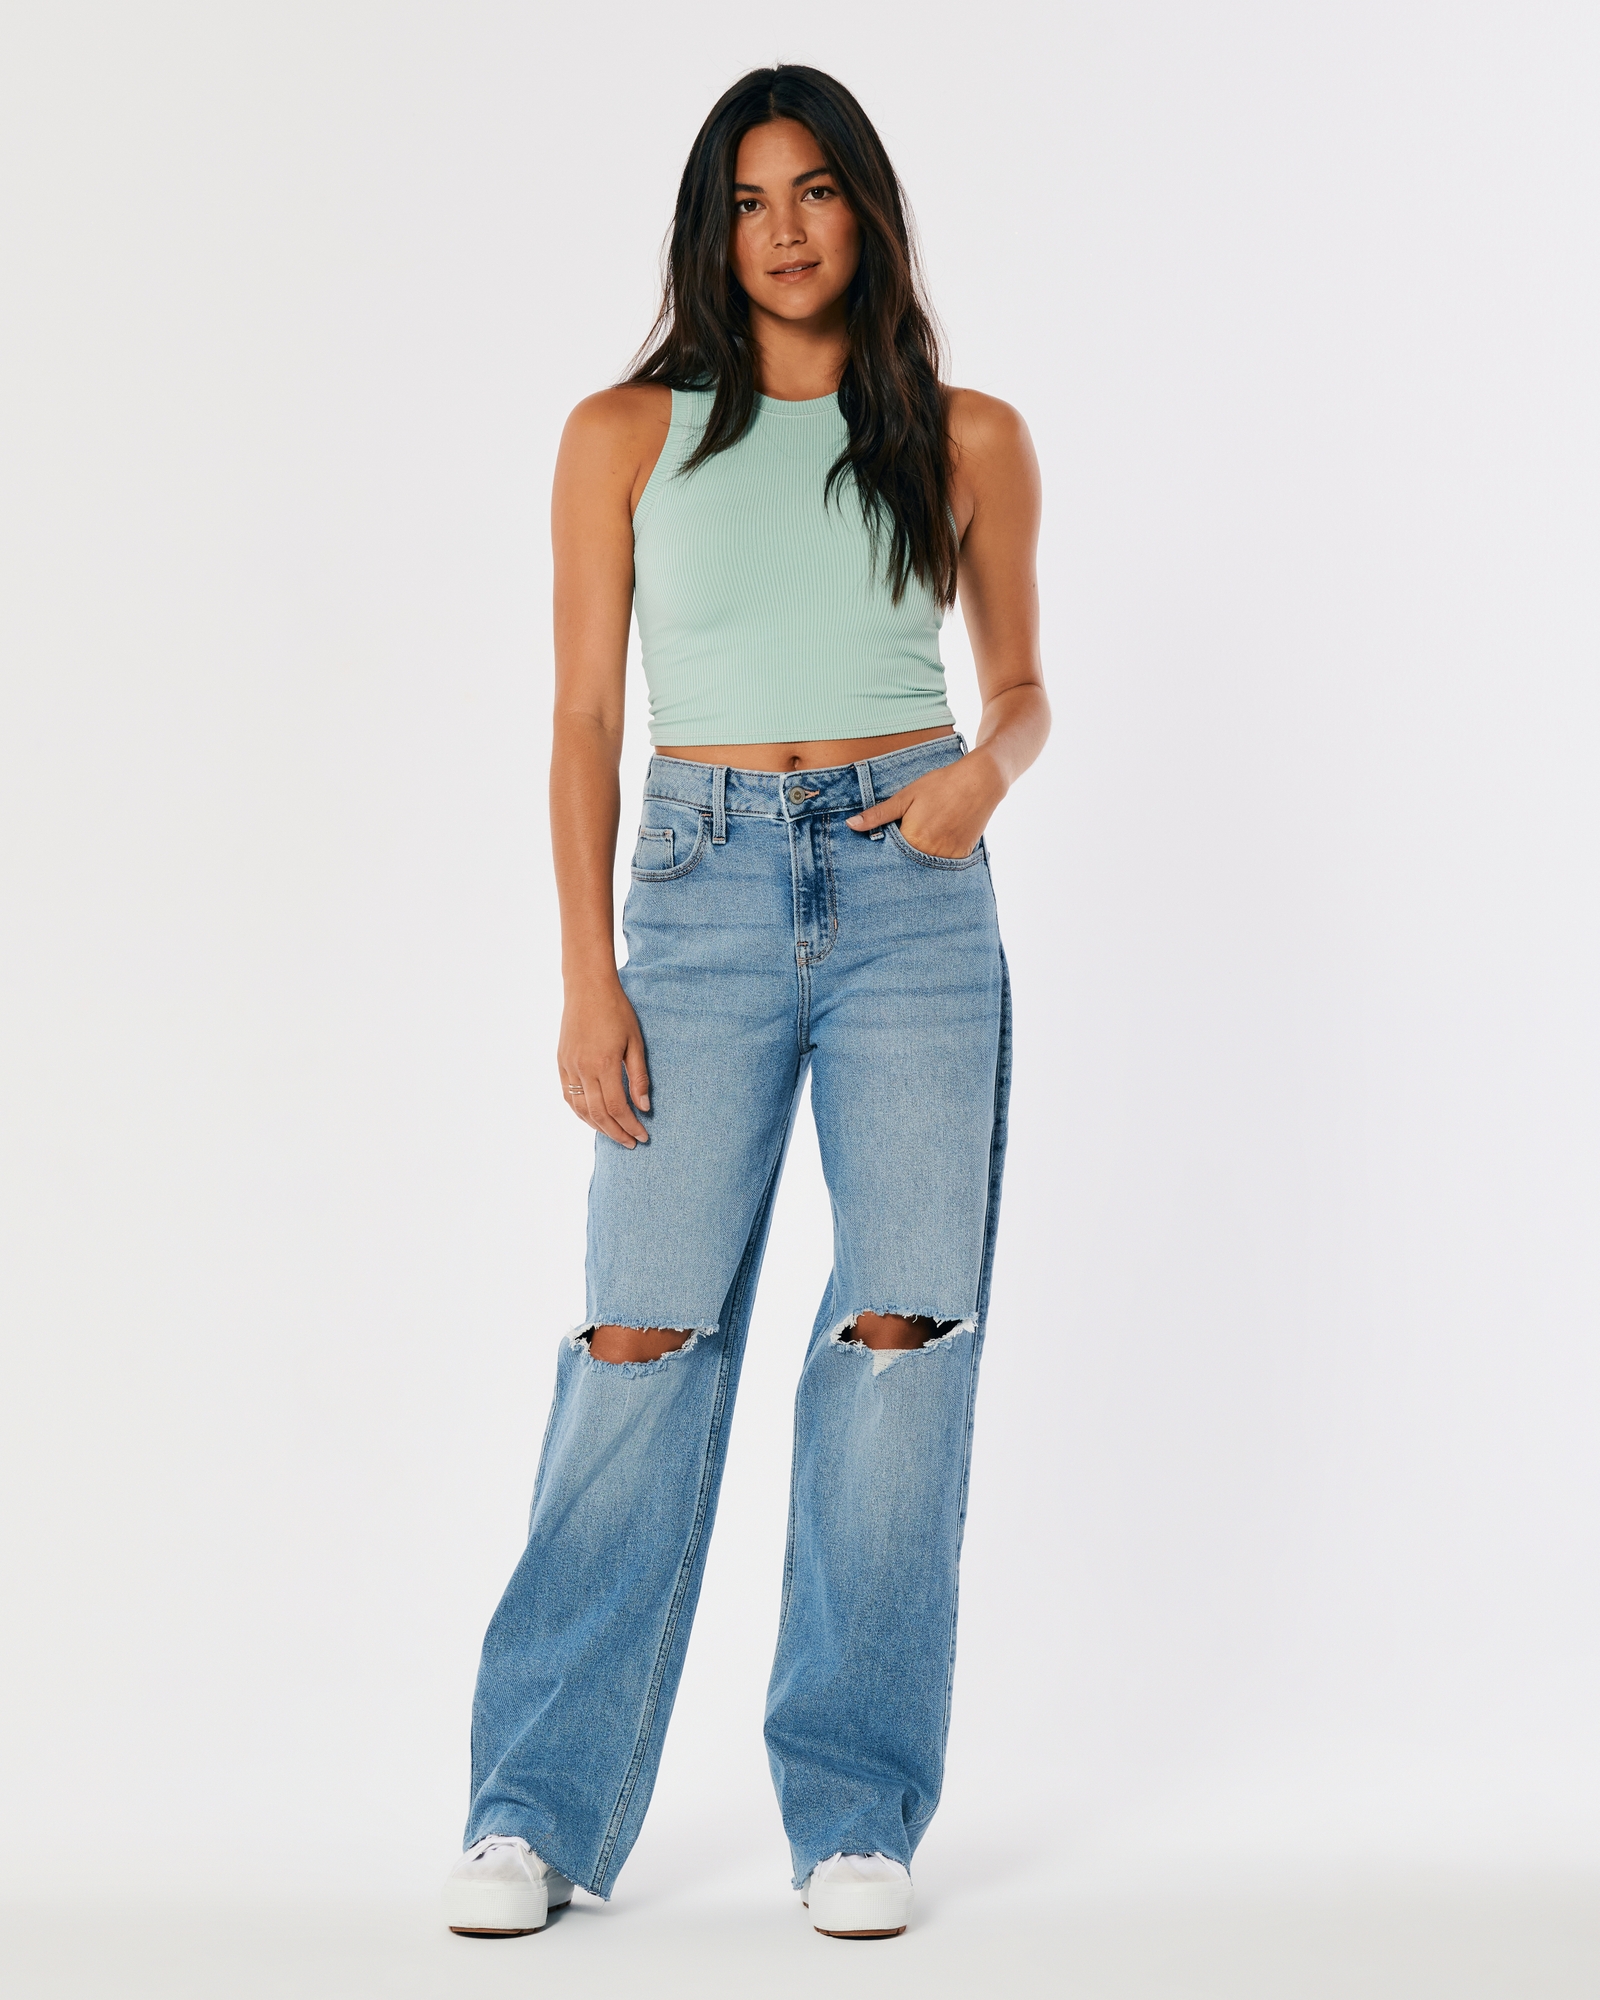 https://img.hollisterco.com/is/image/anf/KIC_355-2176-6554-281_model1.jpg?policy=product-extra-large